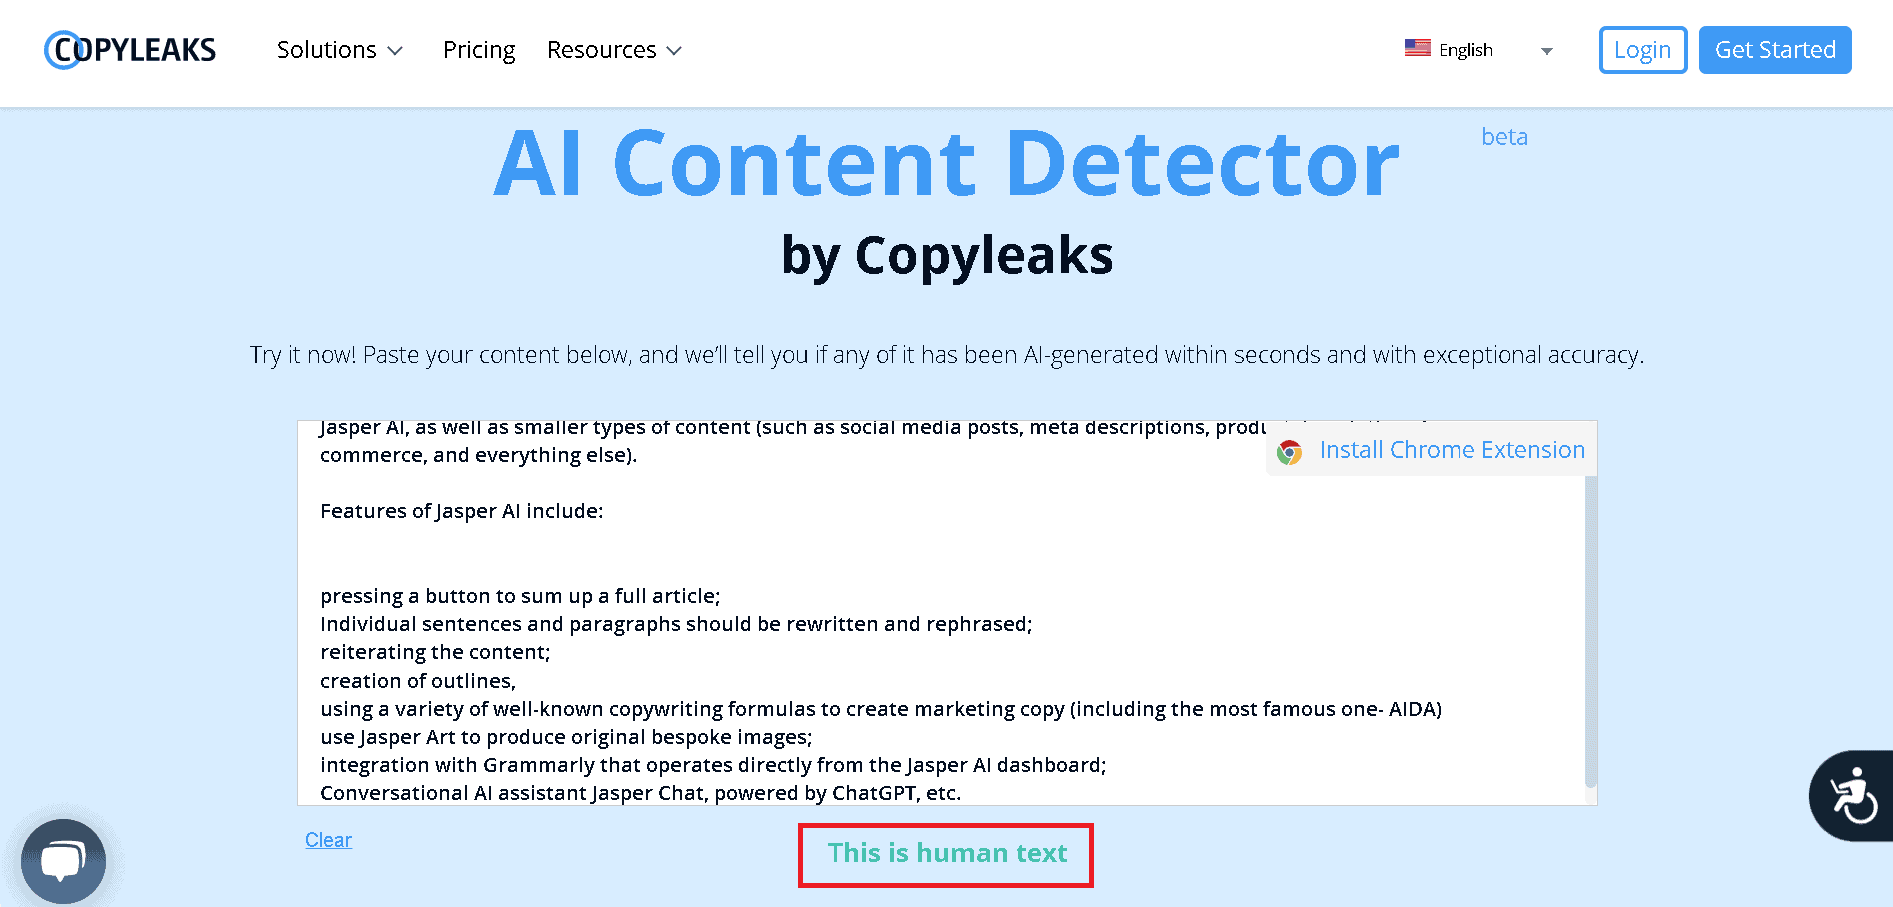 Copyleaks failed to detect content paraphrased by Quillbot AI